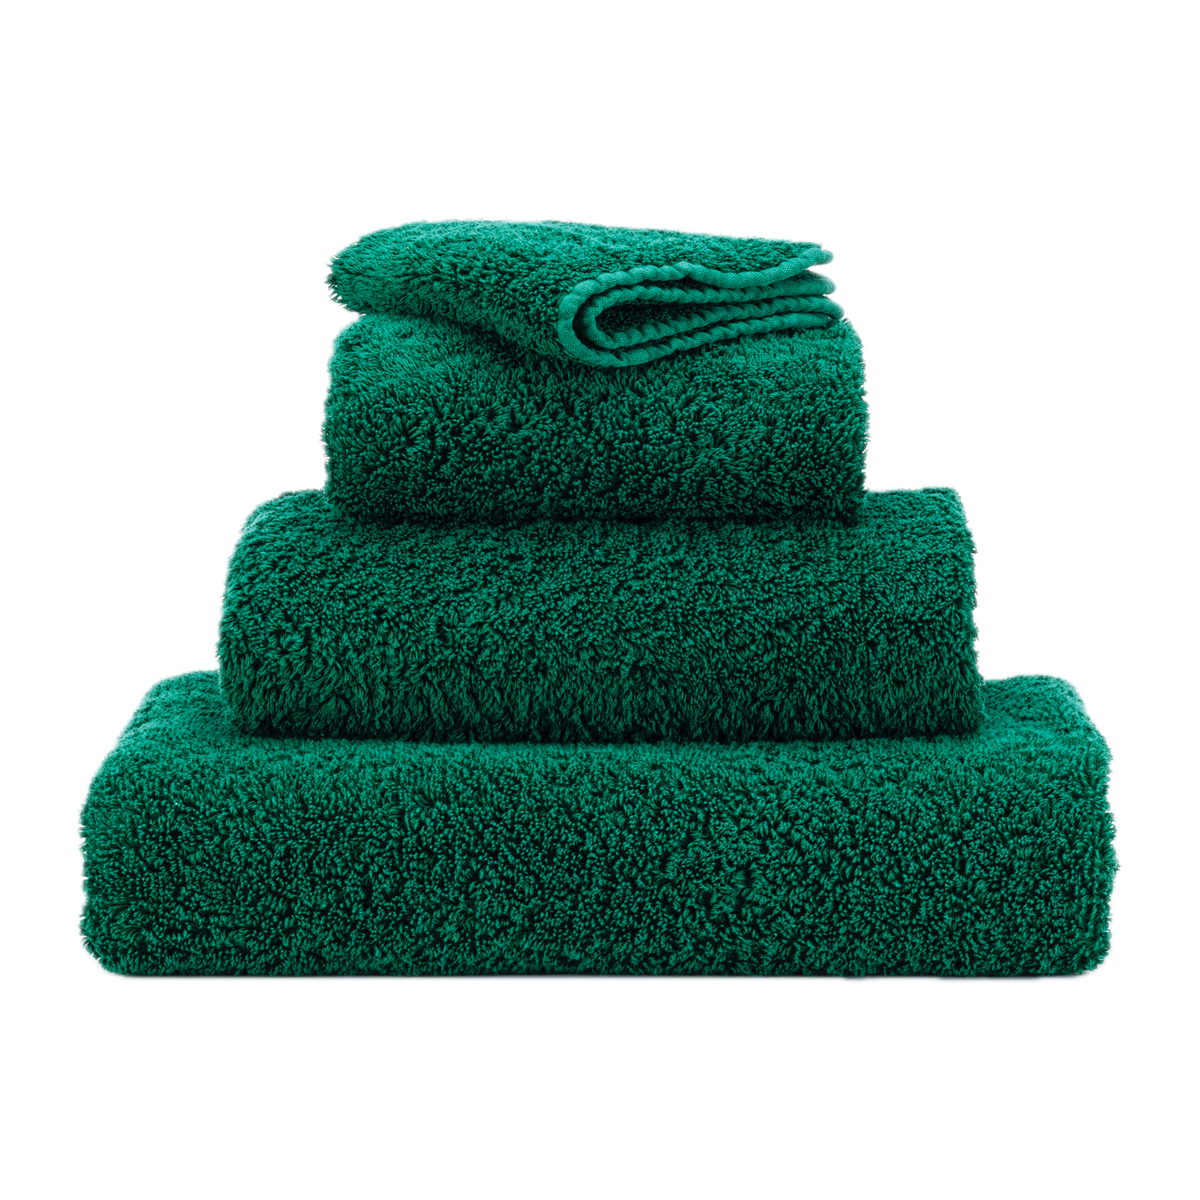 Stack of Abyss Super Pile Bath Towels in British Green Color